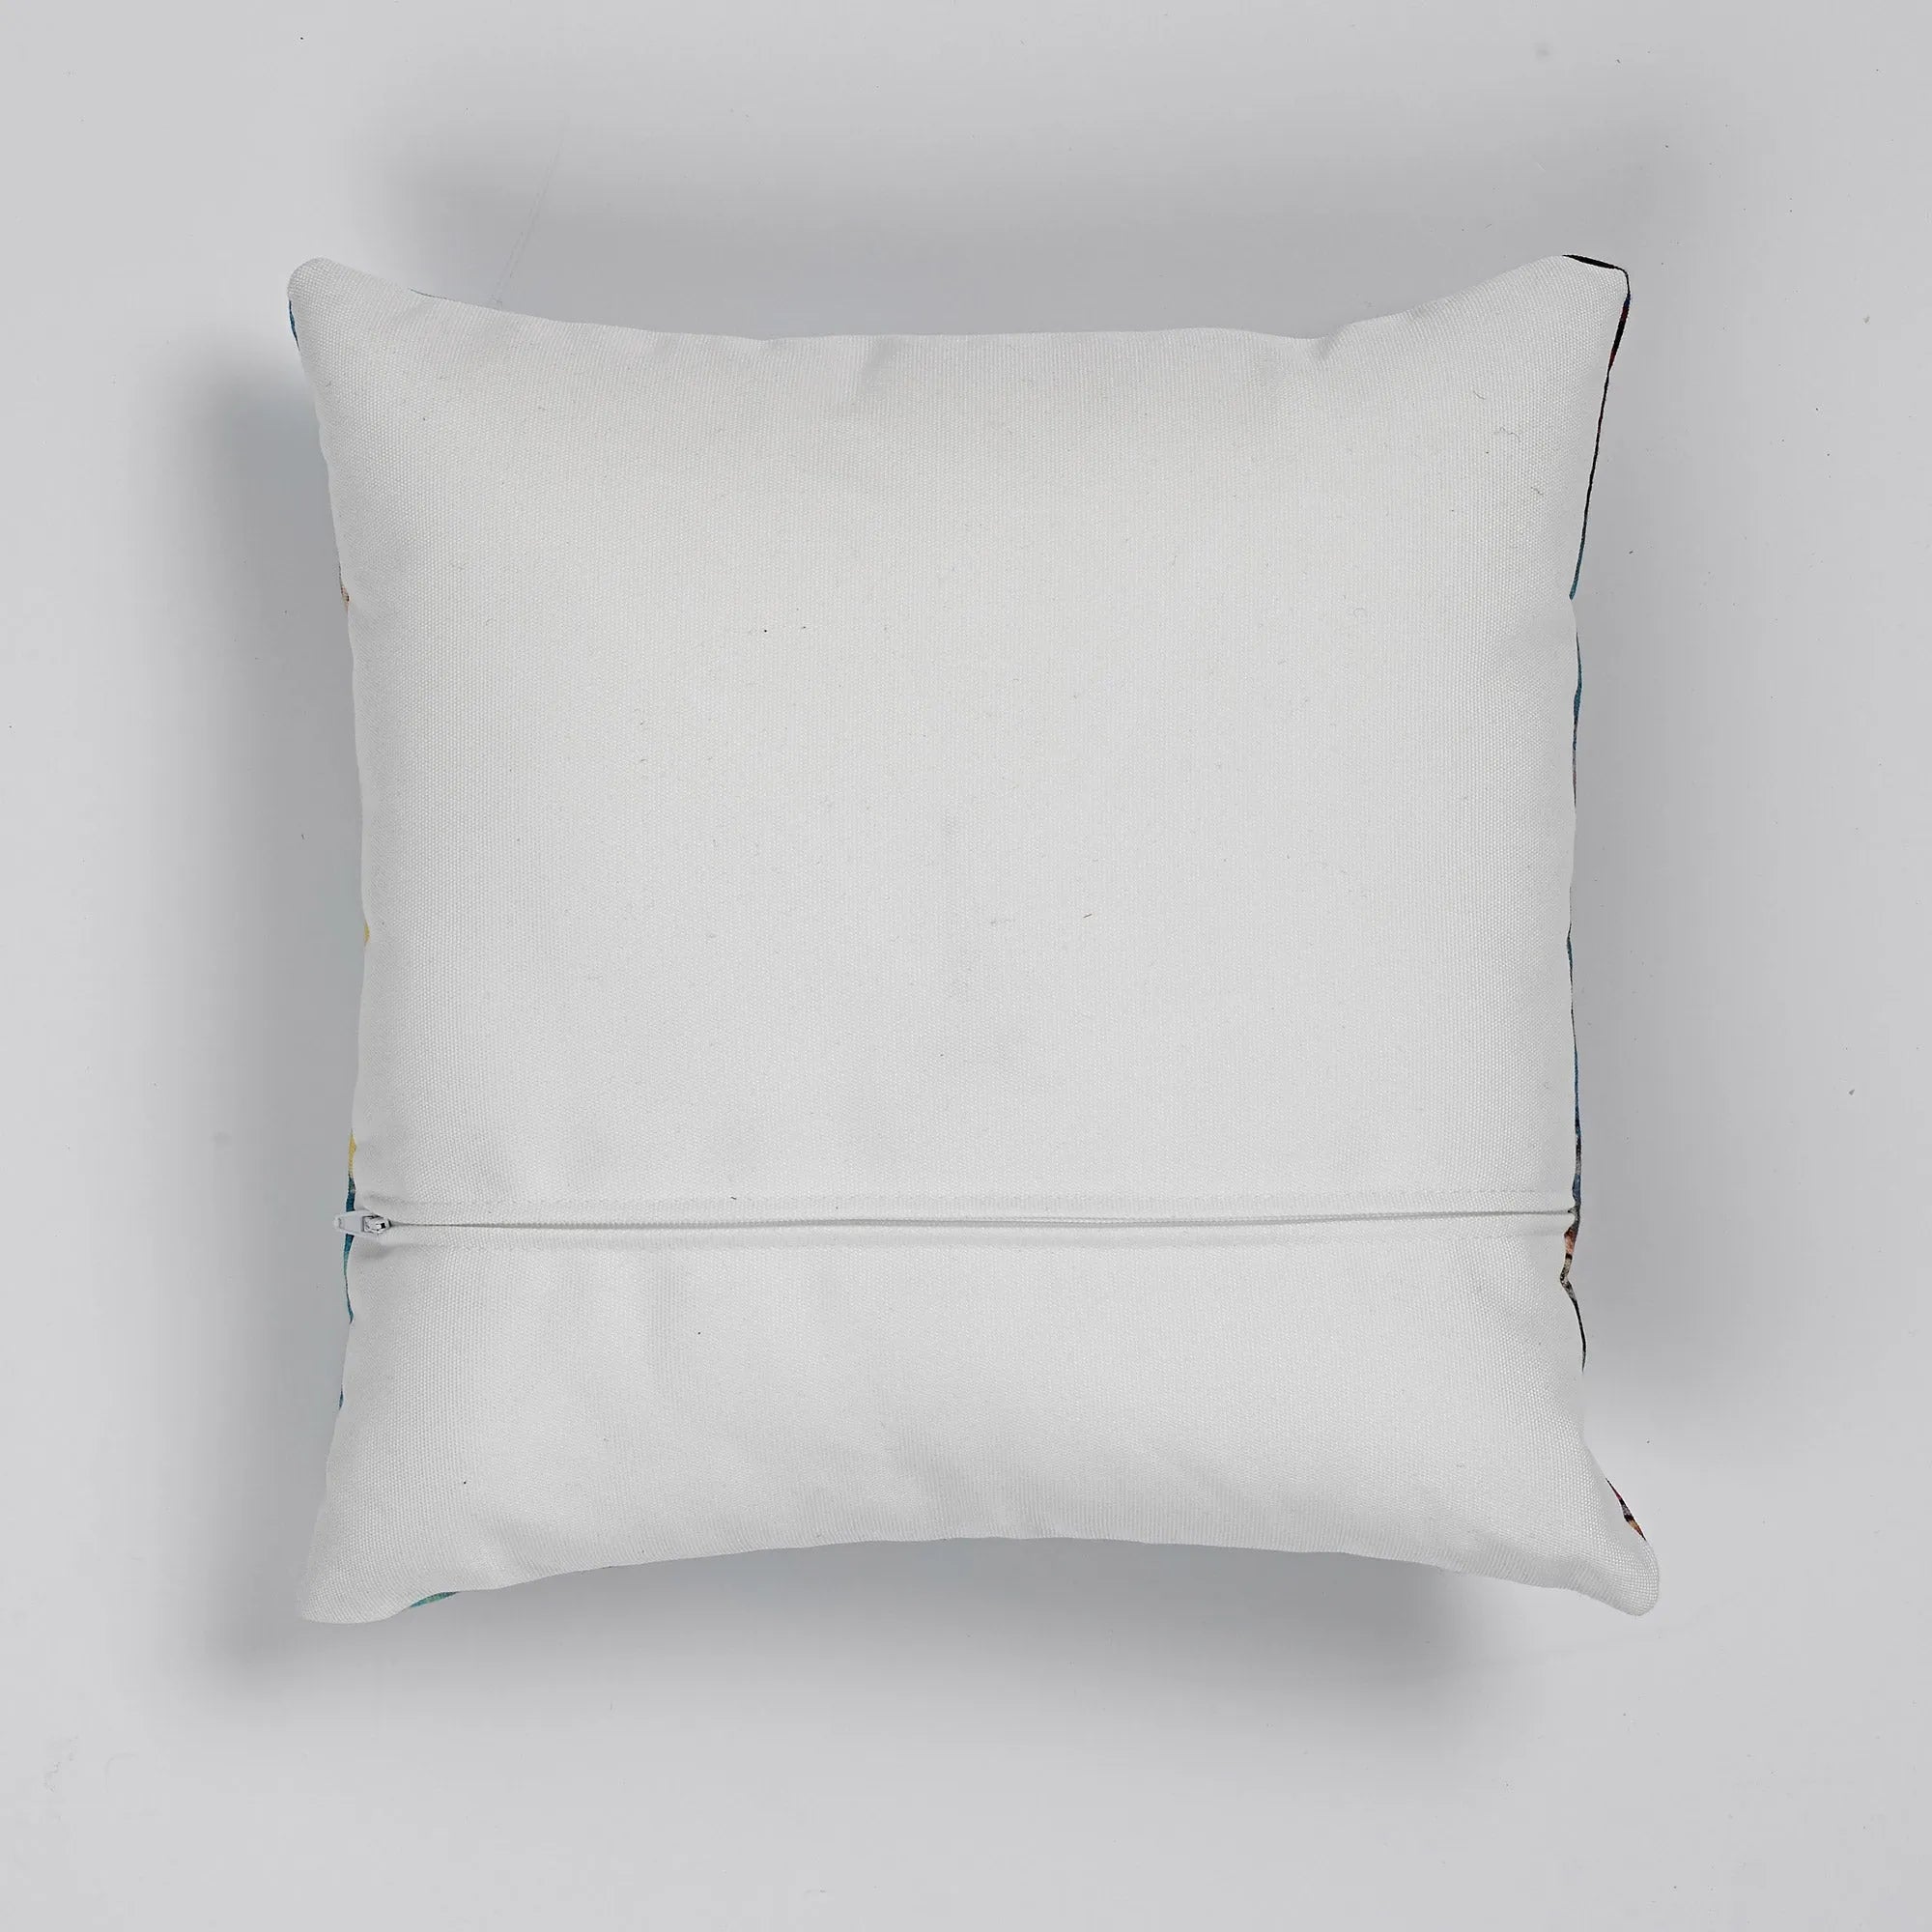 Chinese Military Commander Cushion - Throw Pillows - Aesthetic Art